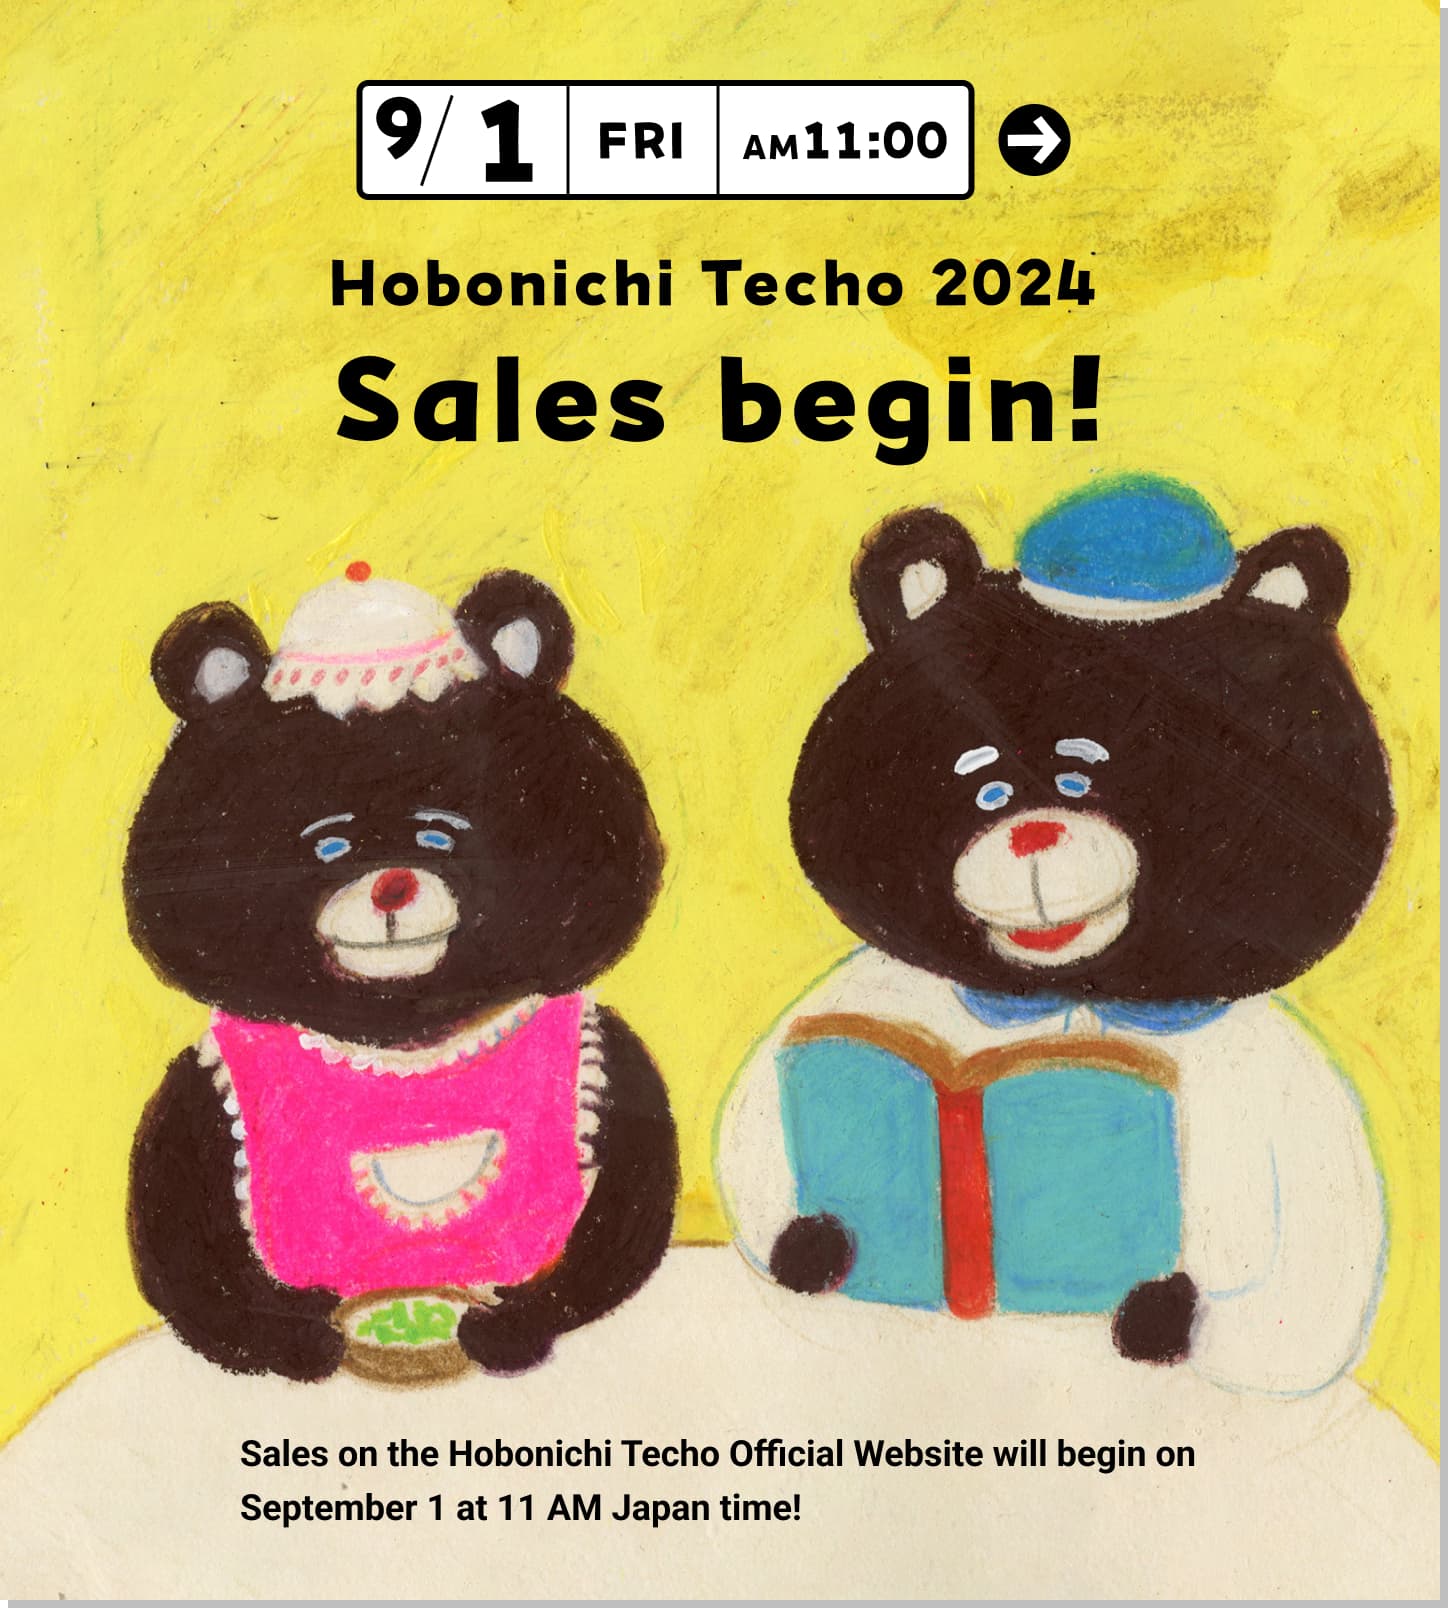 9/1 [FRI] 11:00 AM
                      Hobonichi Techo 2024 
                      Sales begin!                      
                      Sales on the Hobonichi Techoicial Website will begin on September 1 at 11 AM Japan time!